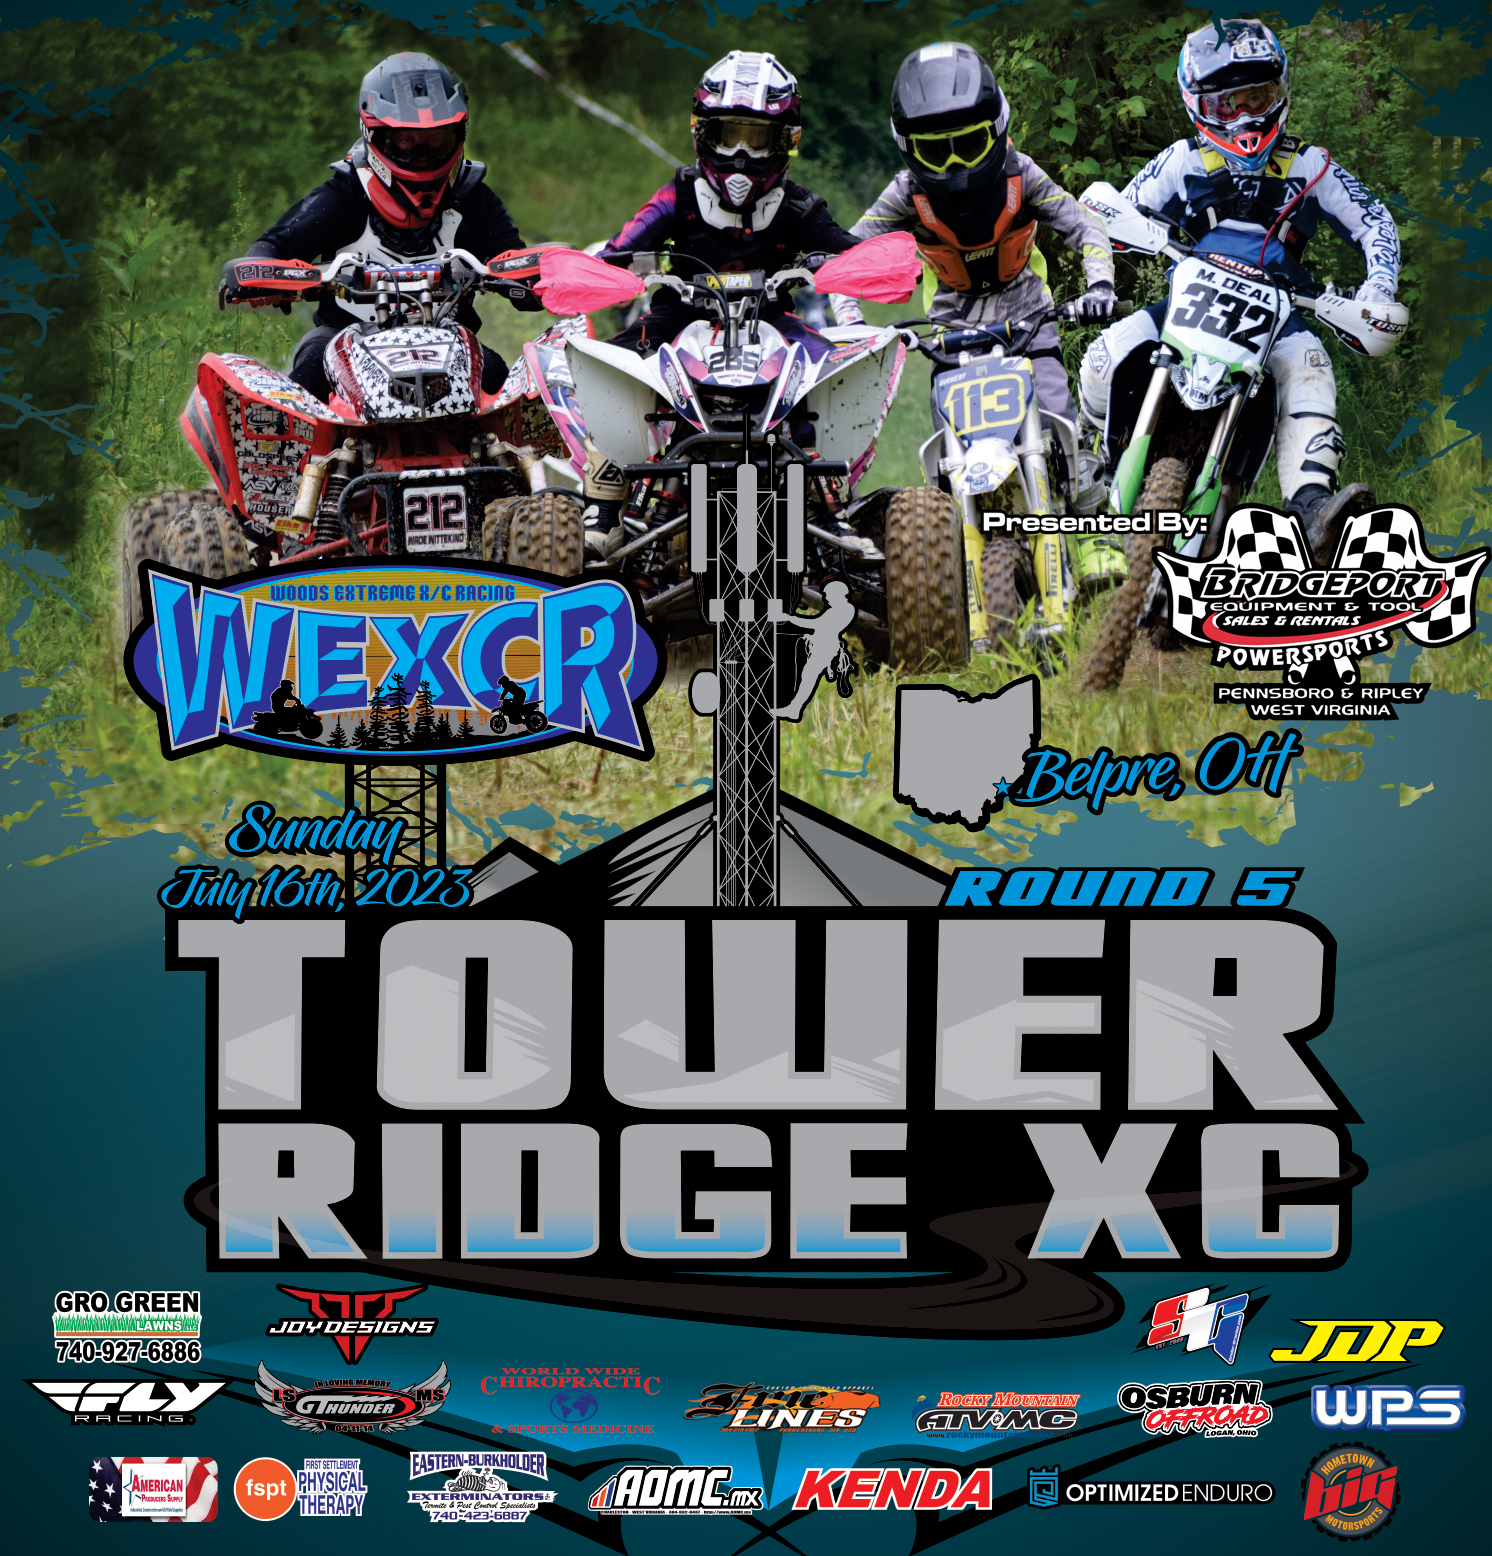 WEXCR 23 Tower Ridge XC R5-flyer1 Date copy